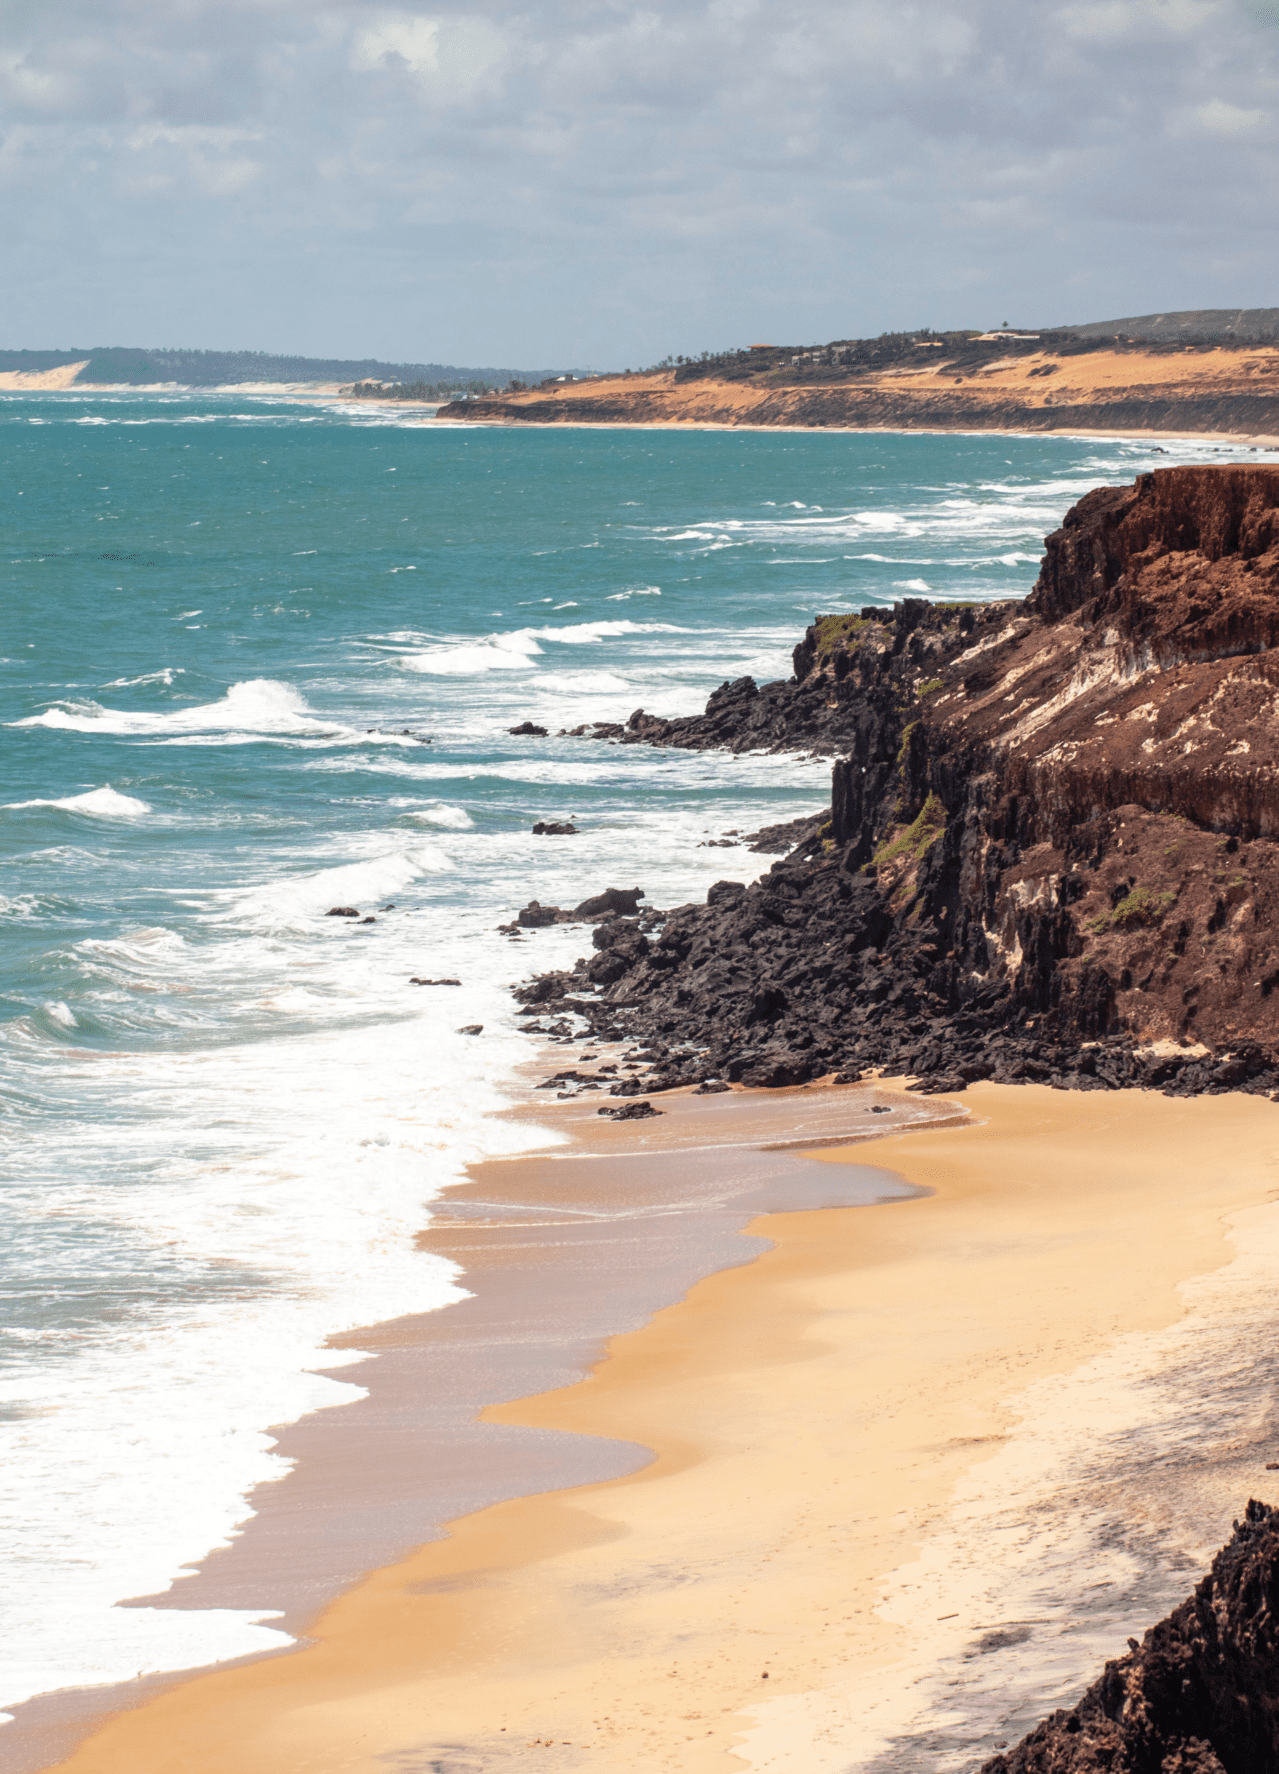 NomadX Pipa, Brazil | A golden-sand beach, with white-foamed waves and a cliff backdrop